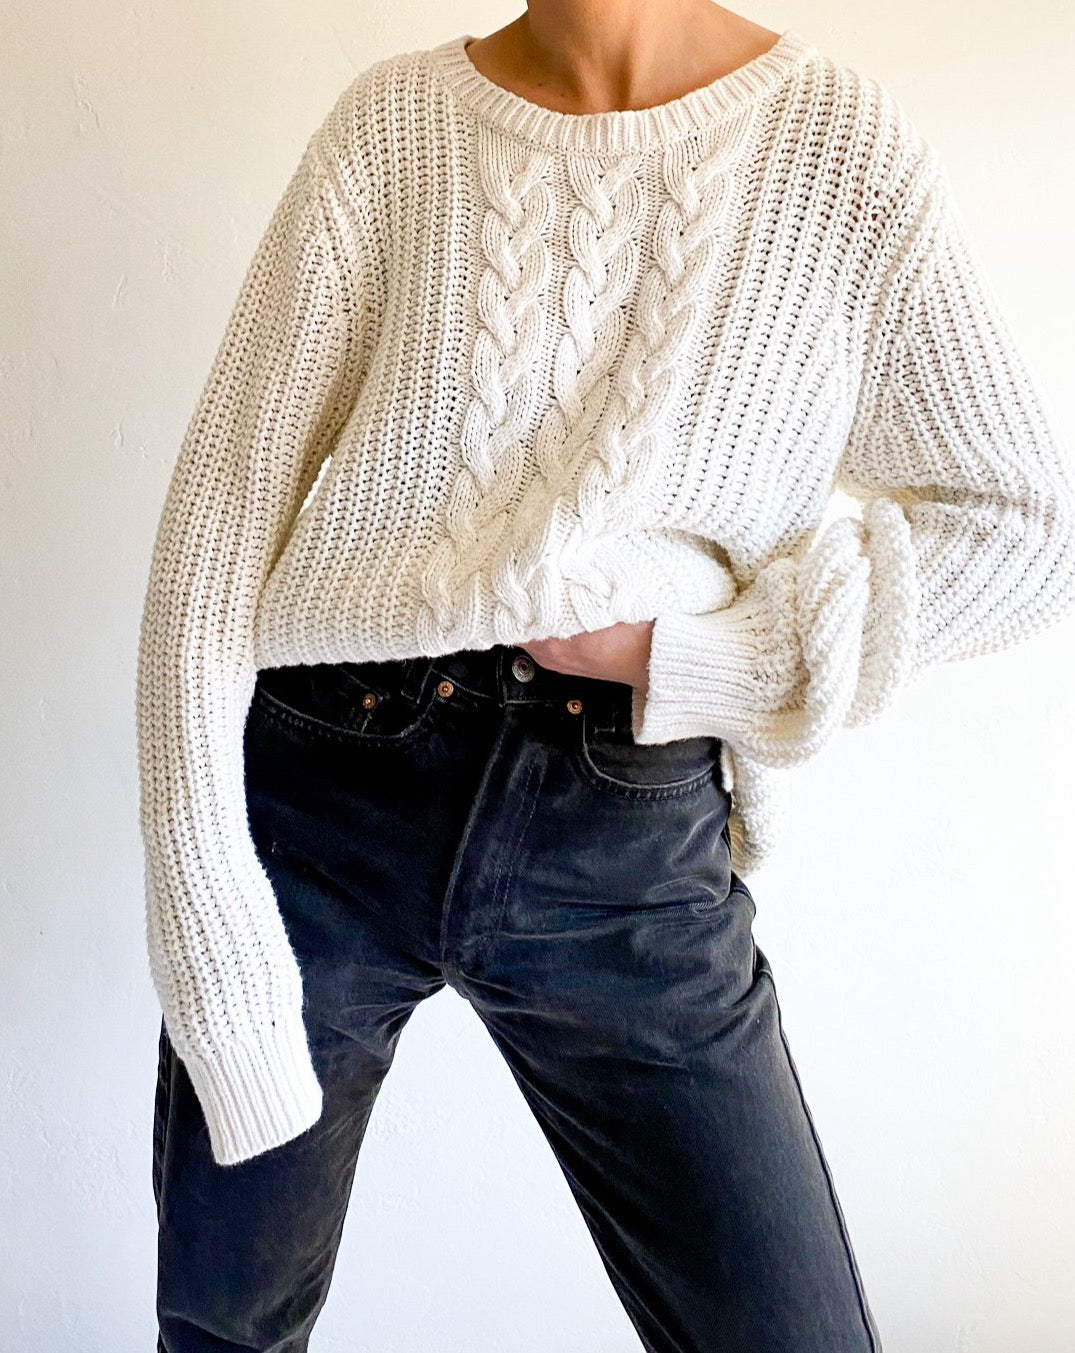 Vintage Nautica White Cable Knit Sweater